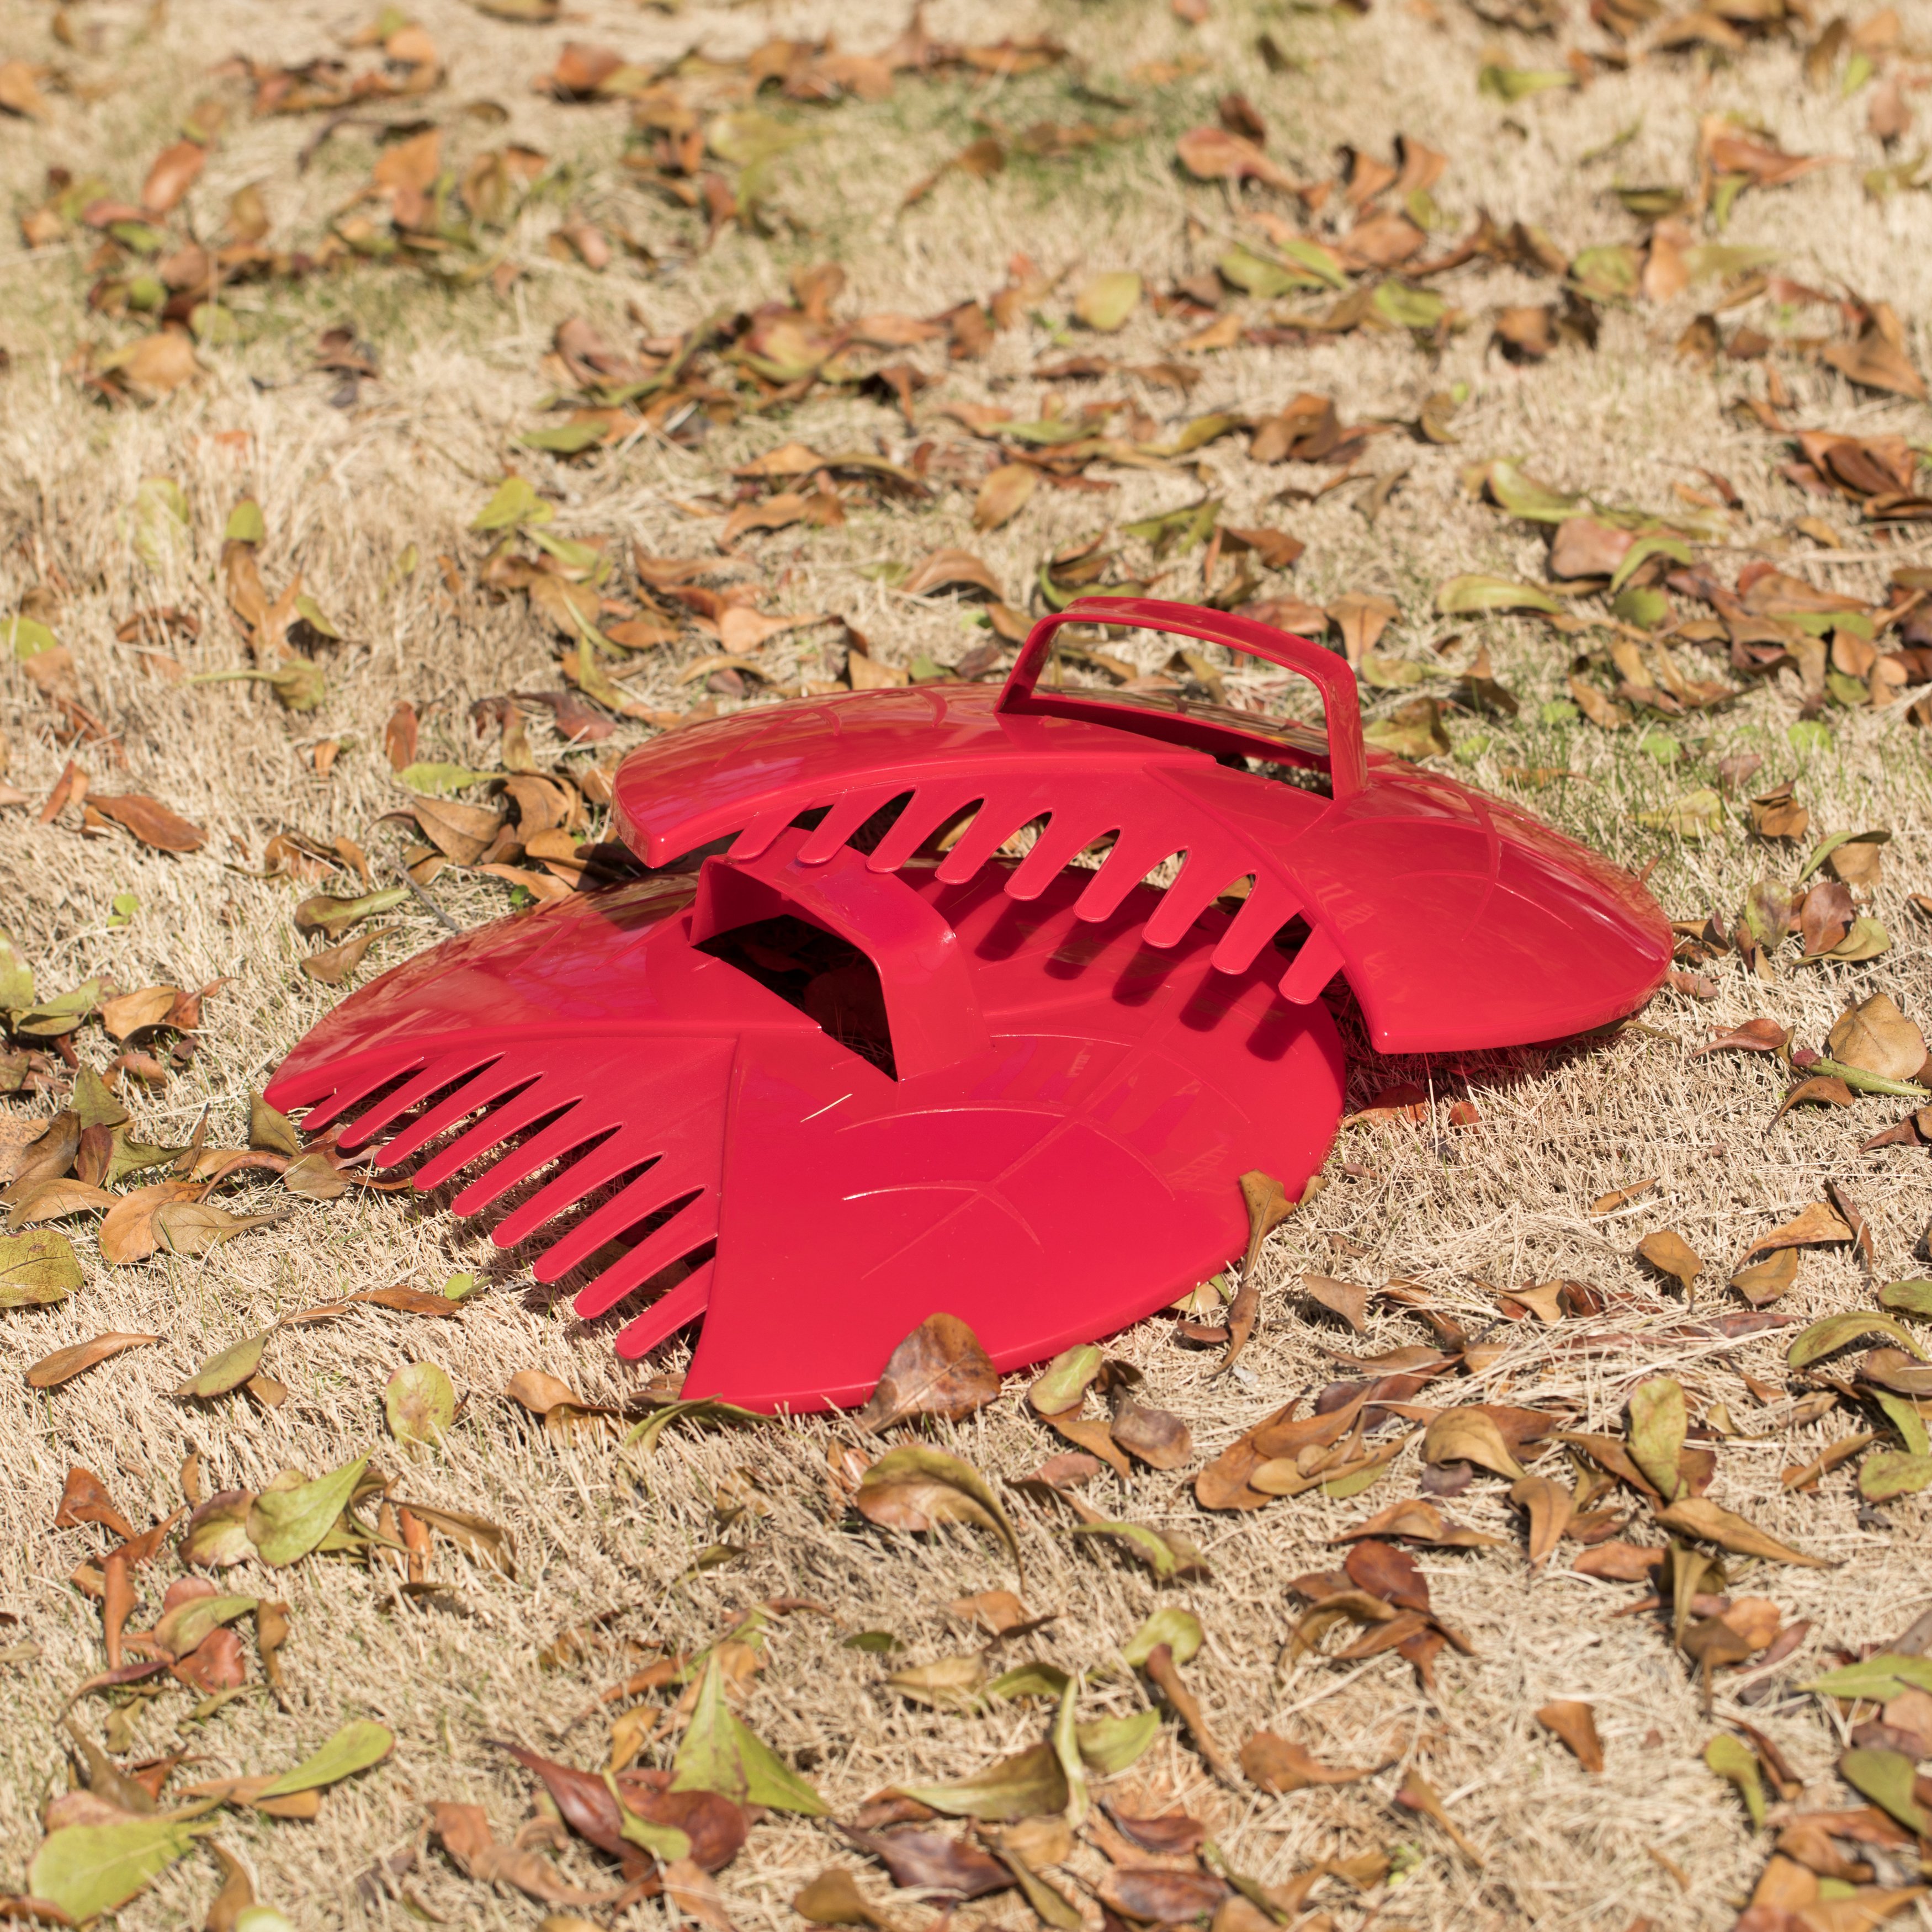 Decorative Pair Of Leaf Scoops, Hand Rakes For Lawn And Garden Cleanup - Red